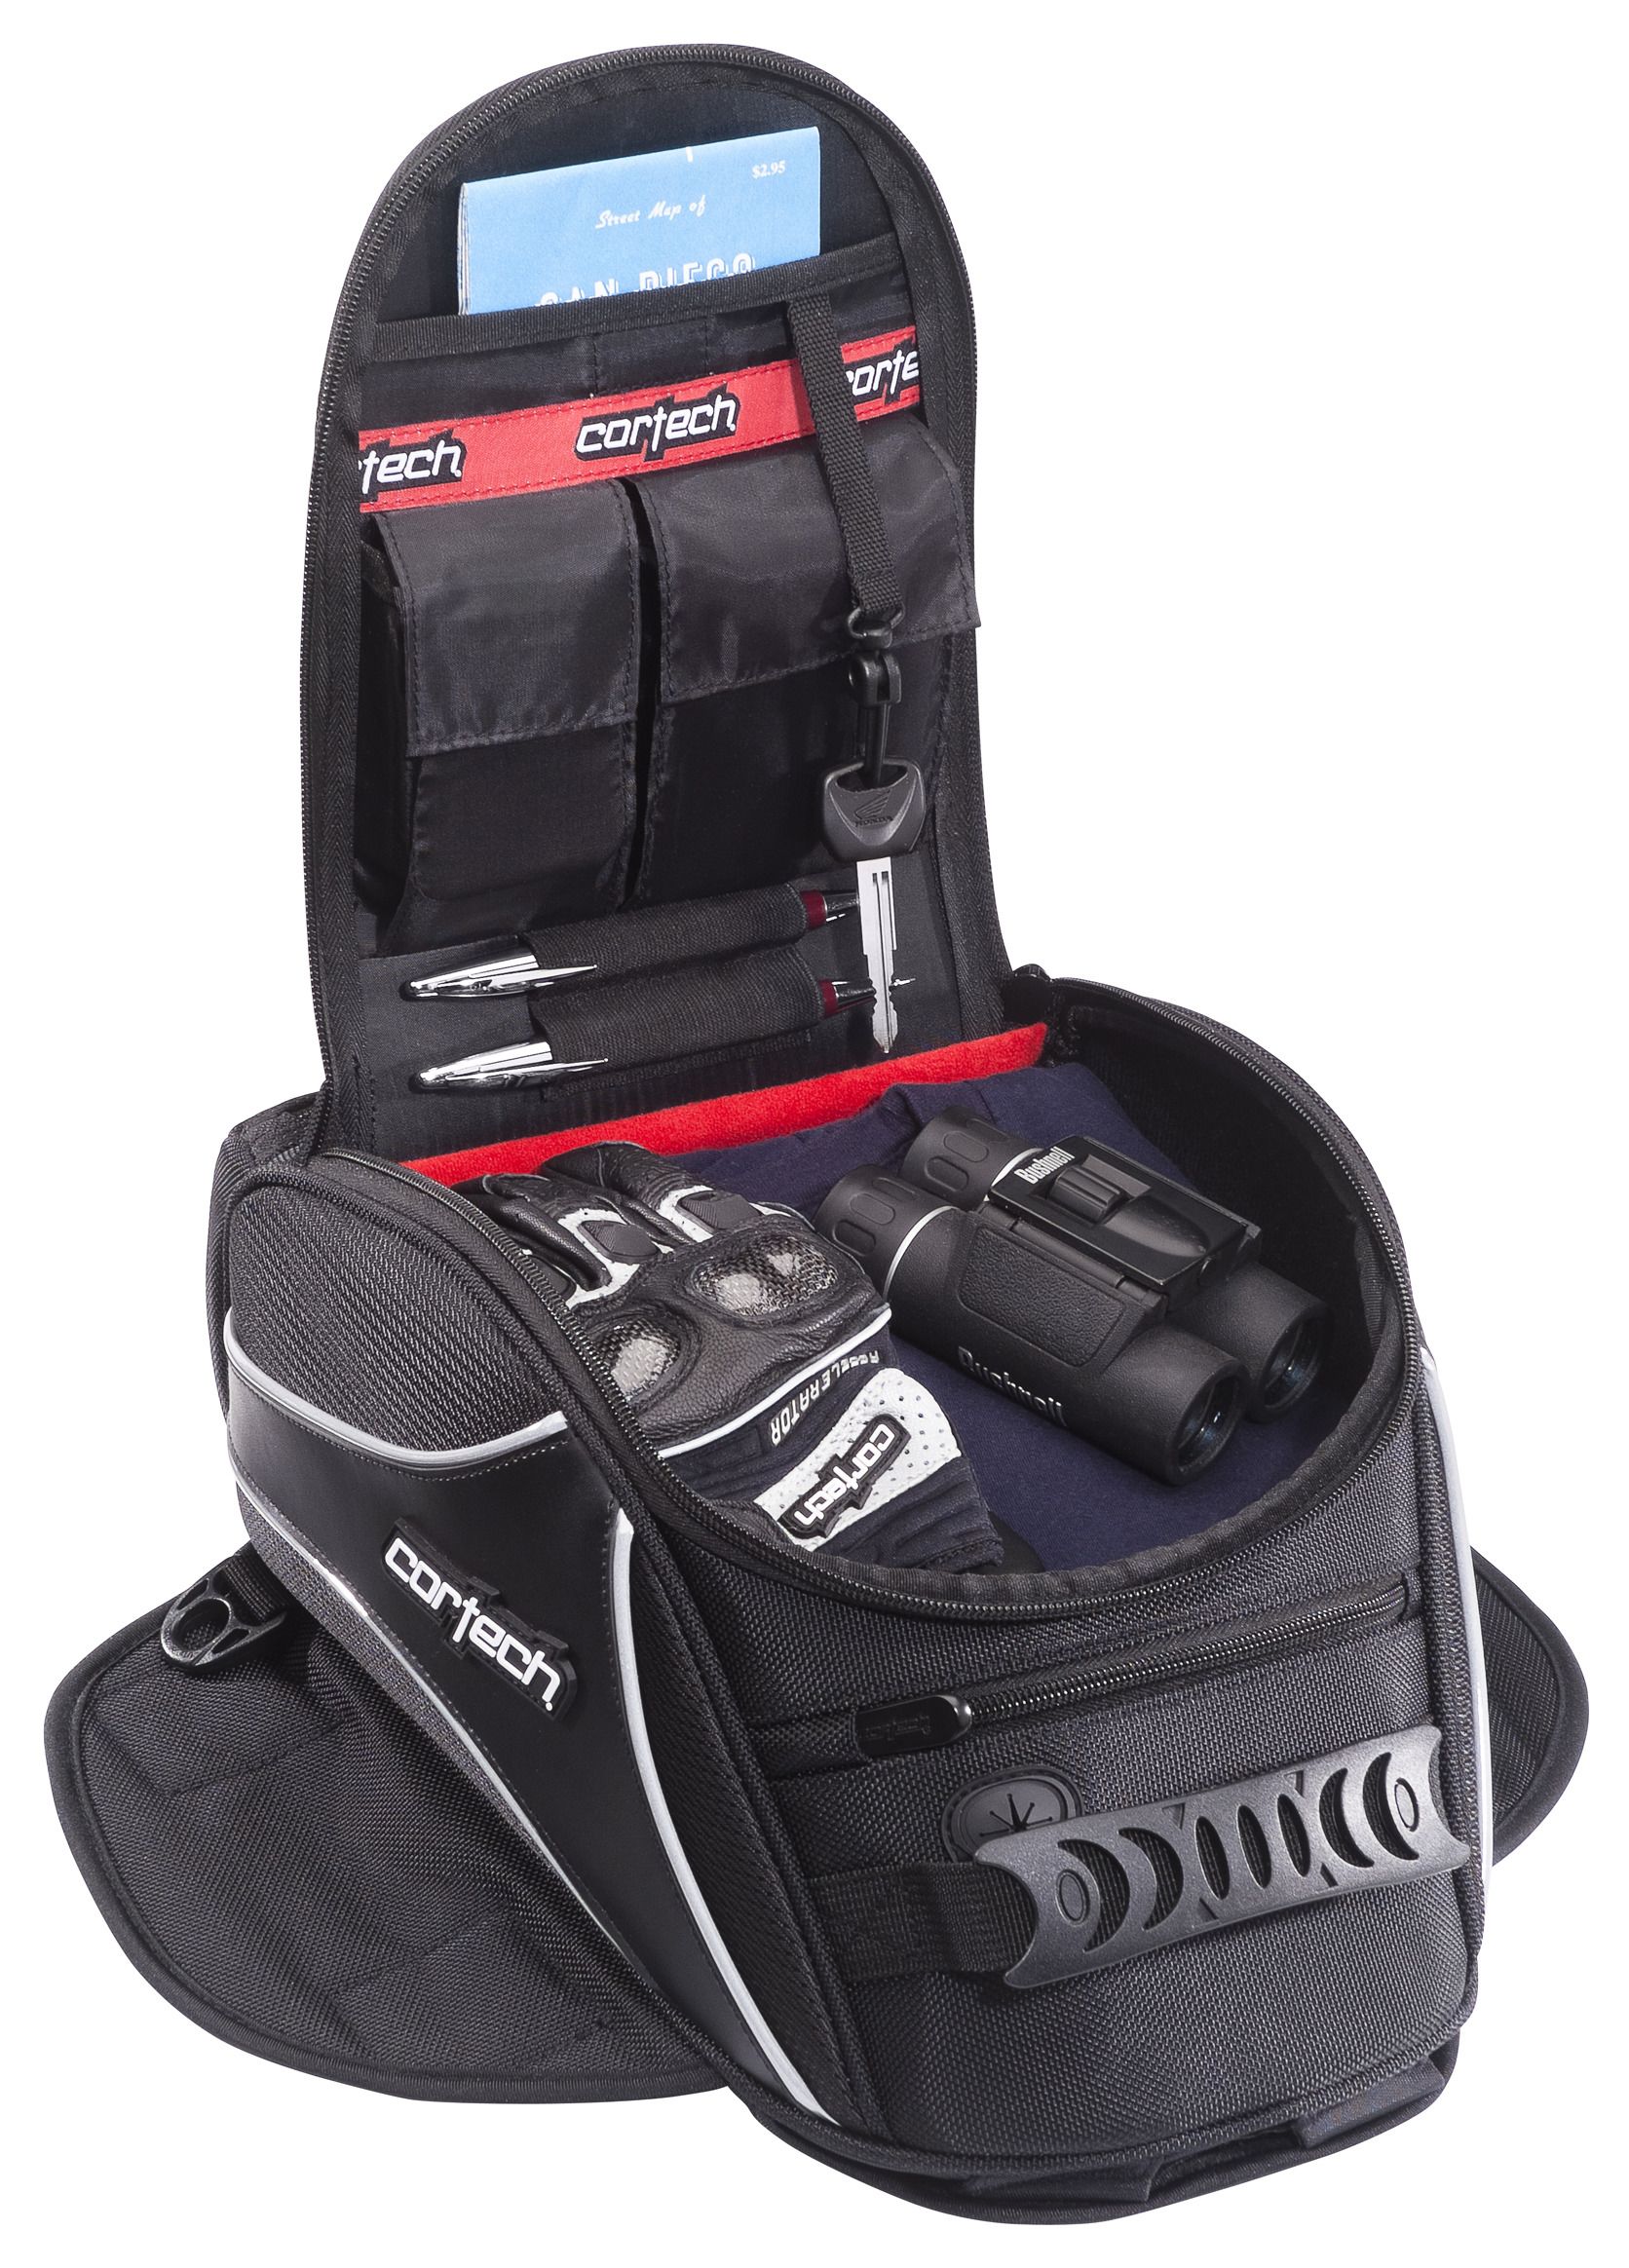 Cortech Super 2.0 12-Liter Magnetic Tank Bag Parts and accessories ...